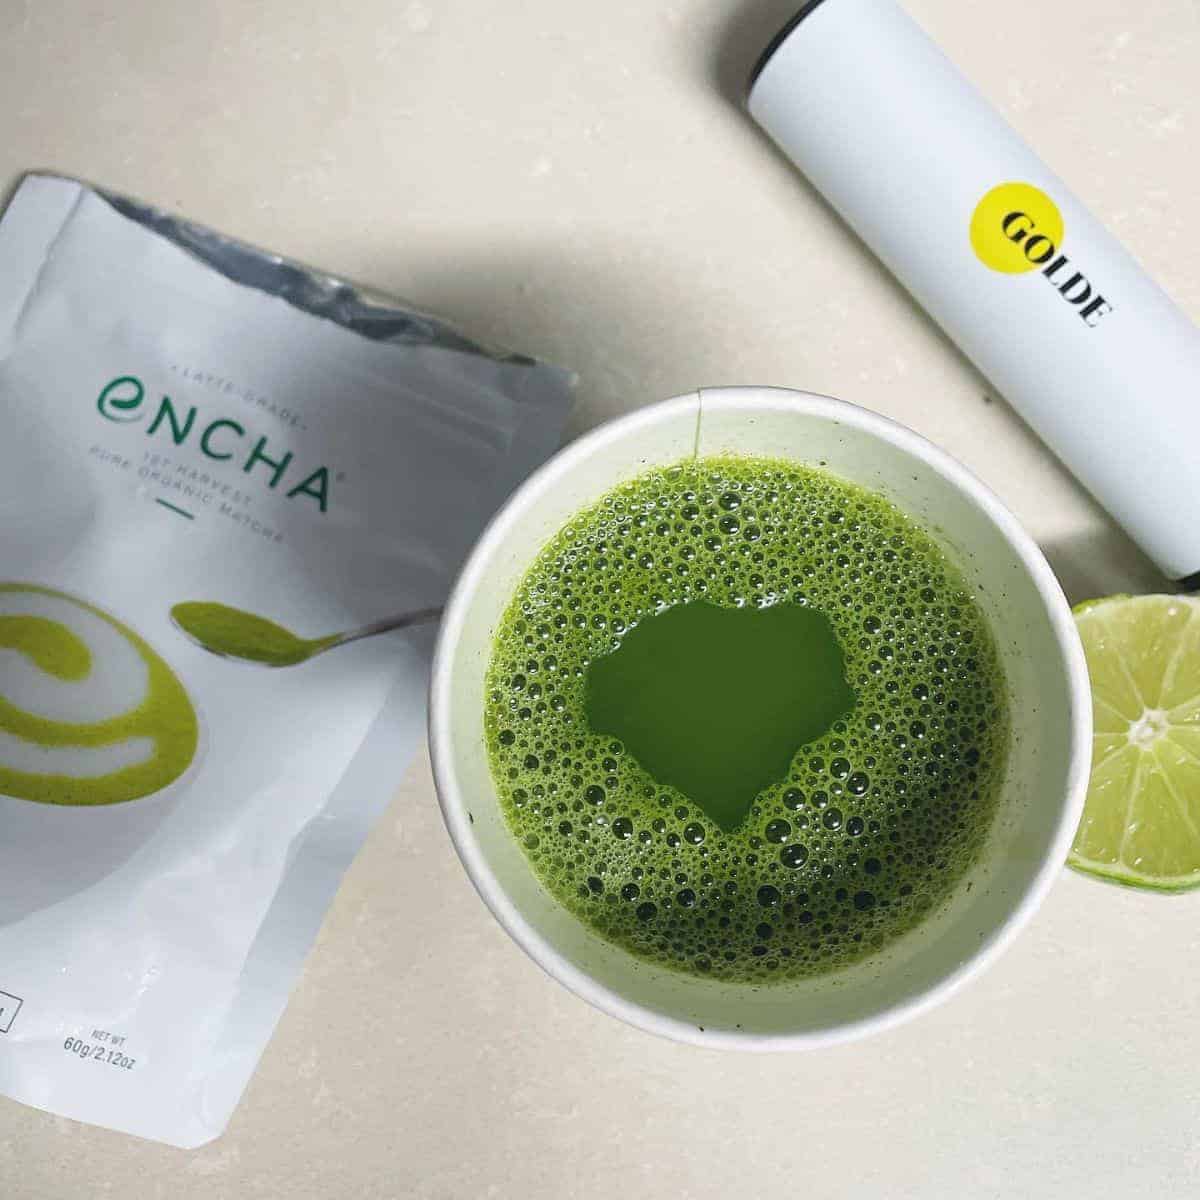  A hot cup of matcha powder drink